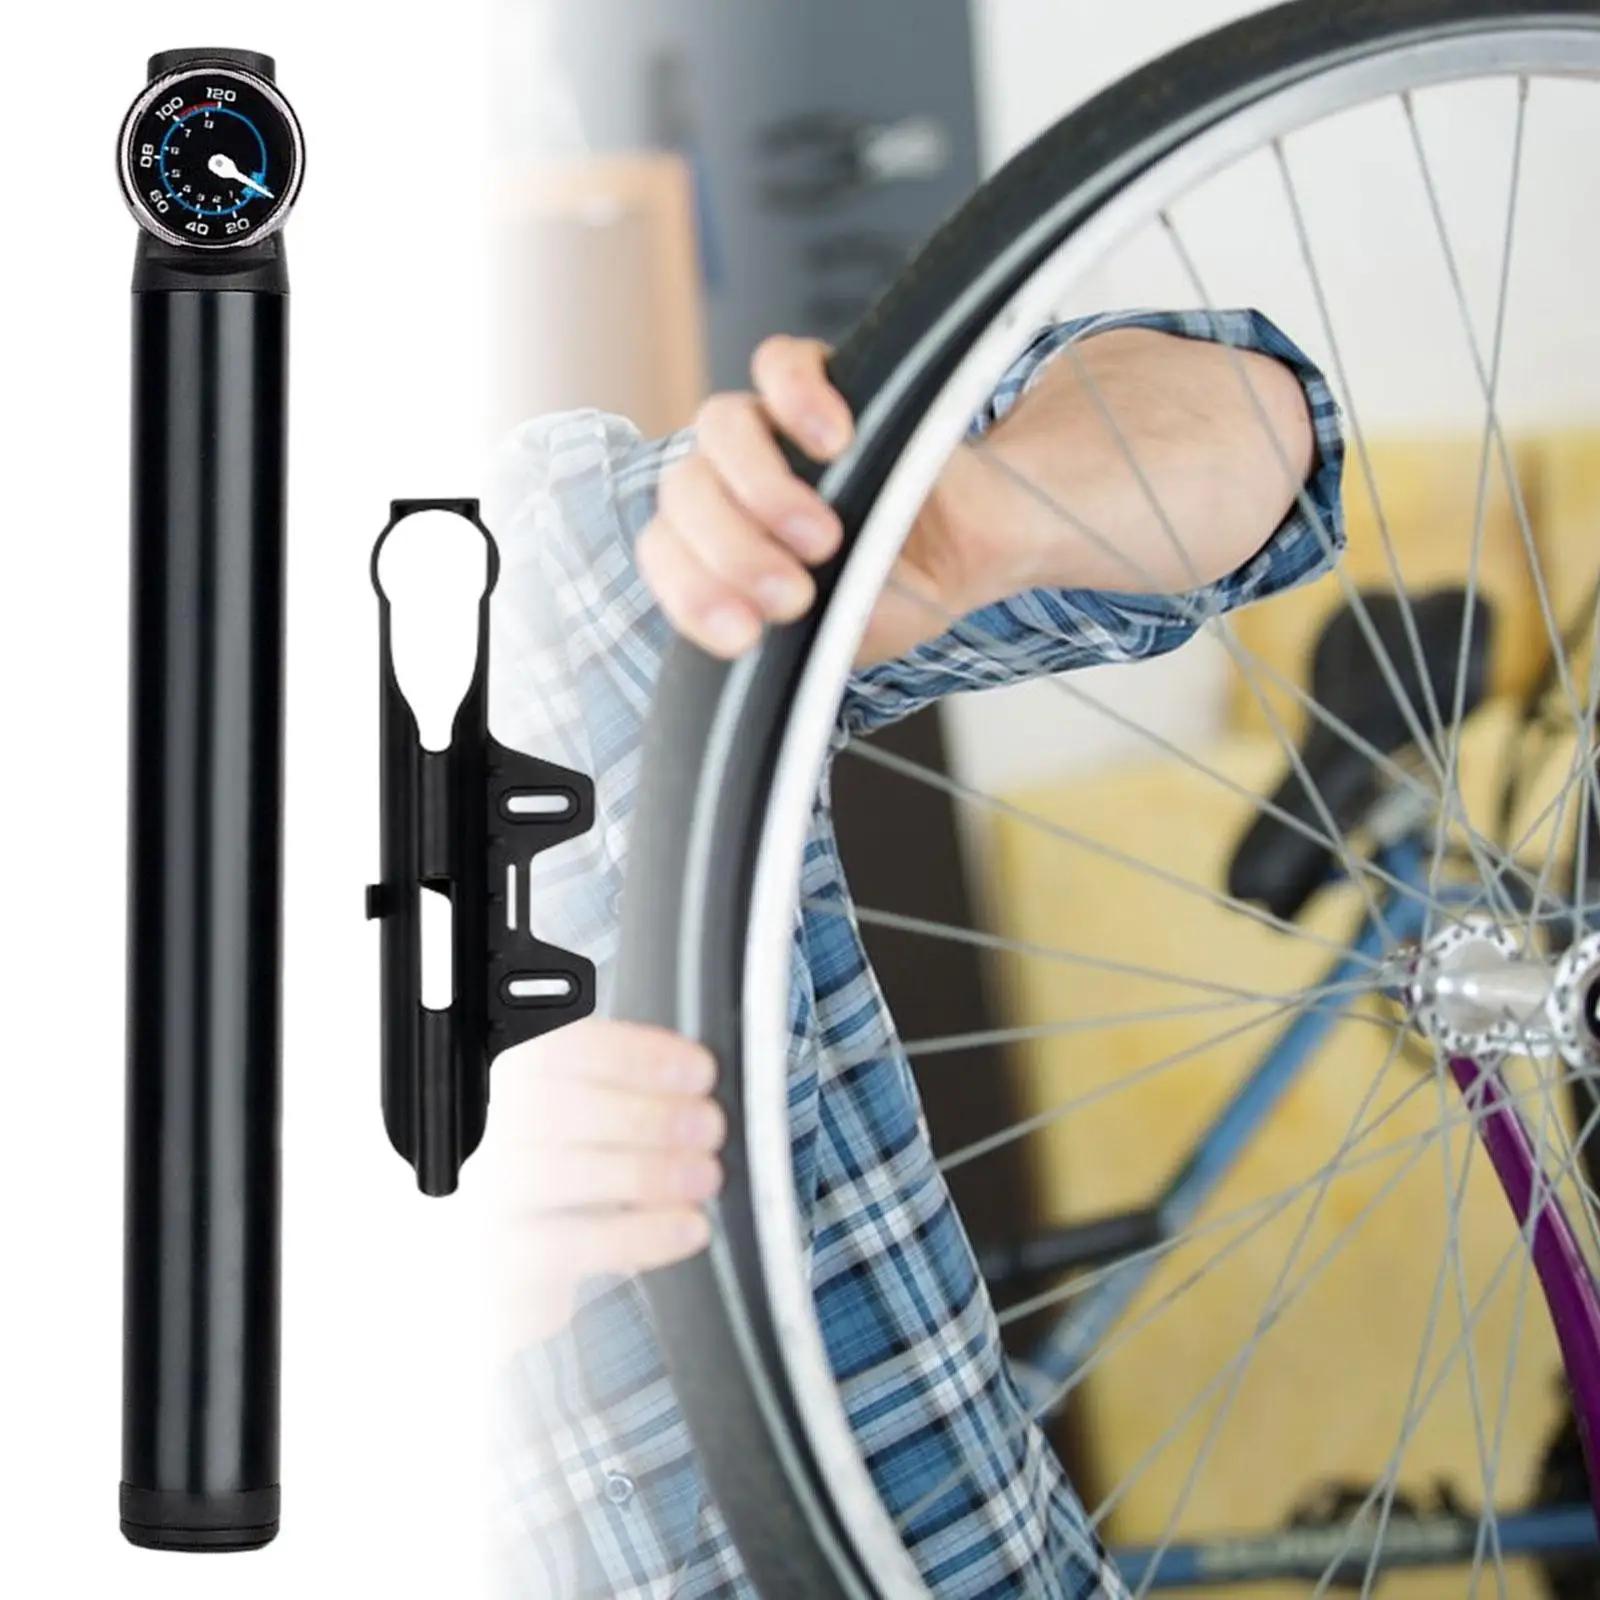 Mini Bike Pumps 120PSI High Pressure with Gauge Portable Bicycle Pump Bike Tire Pump for Cycling Travel